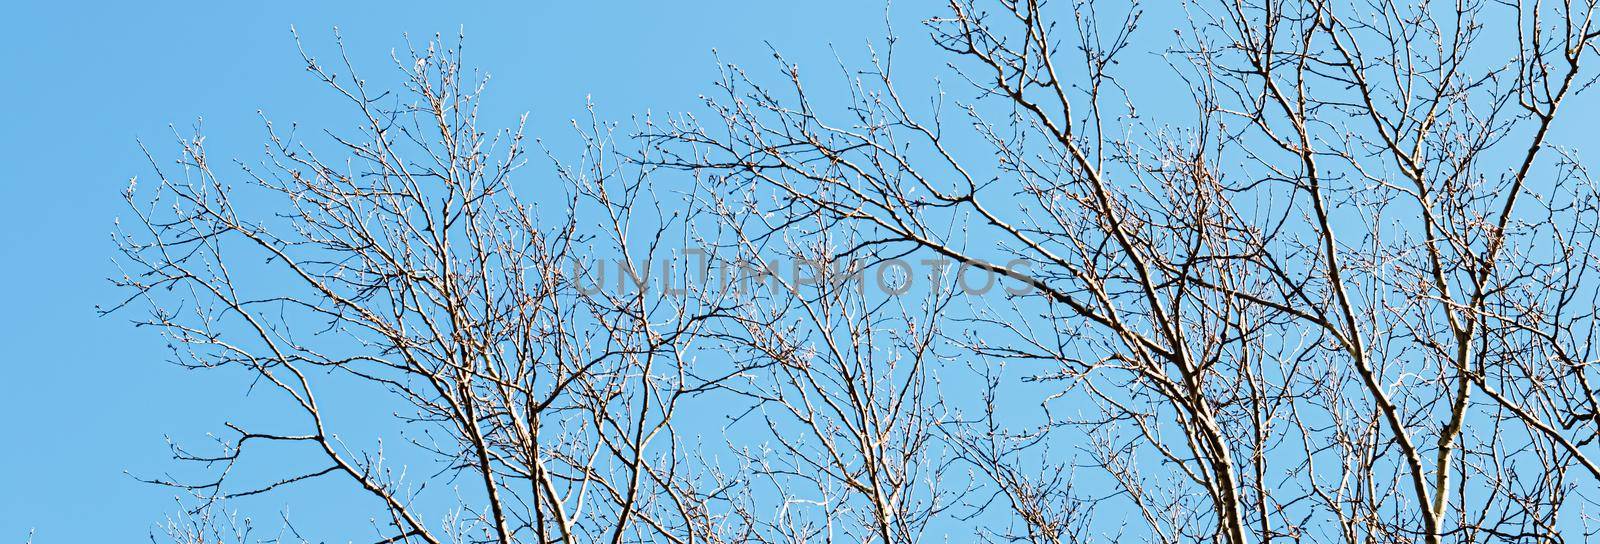 Tree and blue sky in early spring or autumn, nature background.